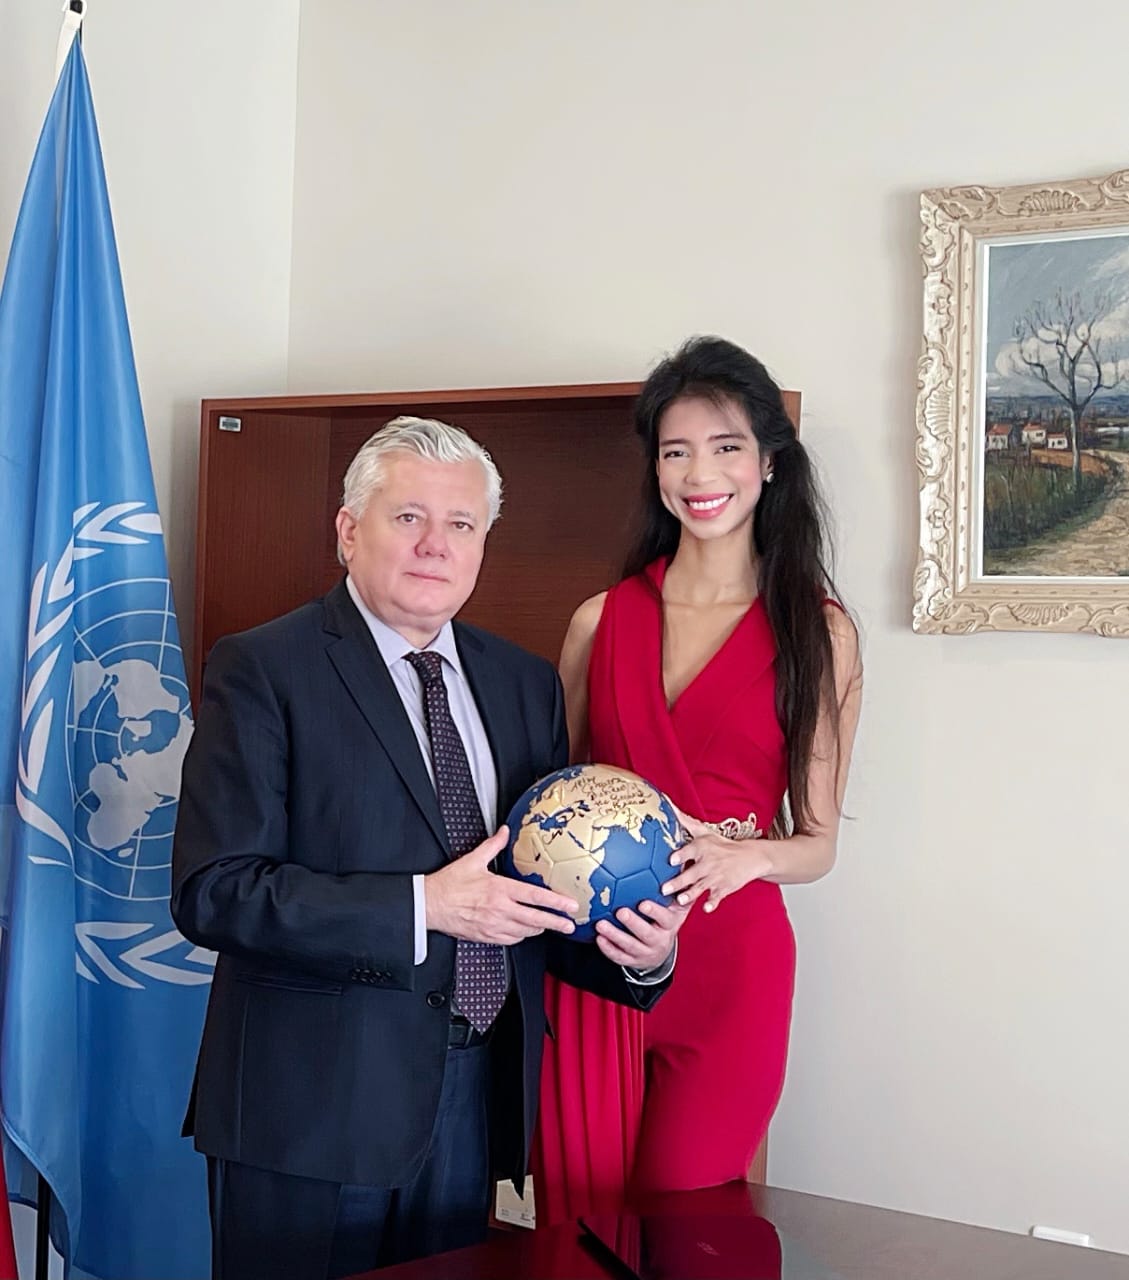 FIFA World Cup : Why is it important for the UNESCO Presidency and Rani Vanouska Modely for Football become a world heritage?